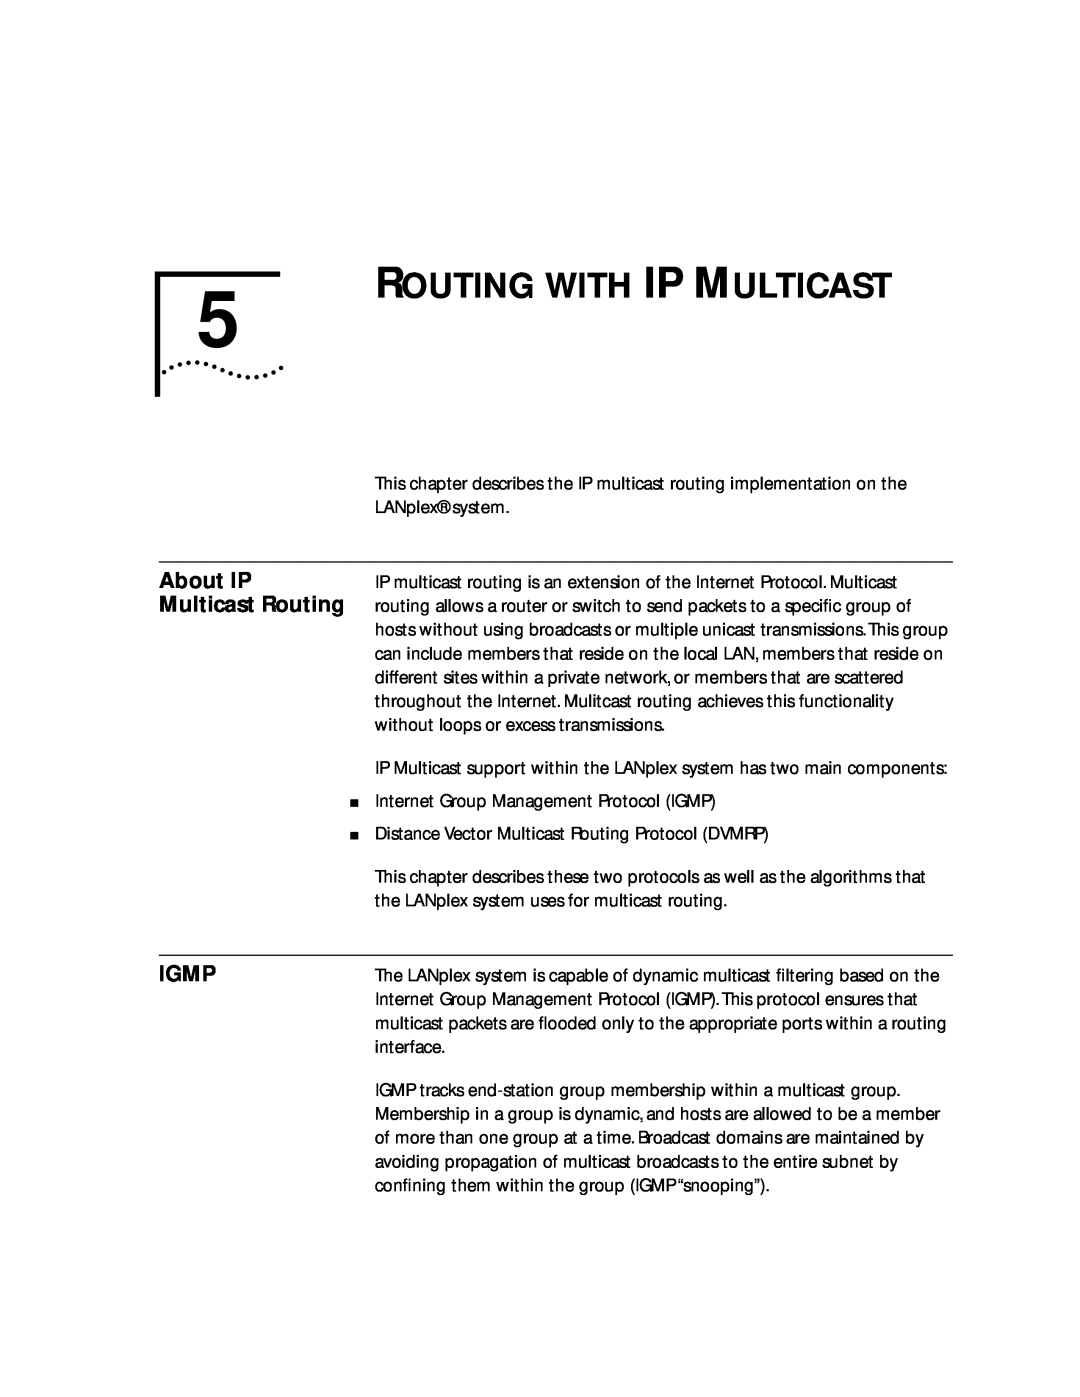 3Com 2500 manual Routing With Ip Multicast, About IP, Multicast Routing, Igmp 